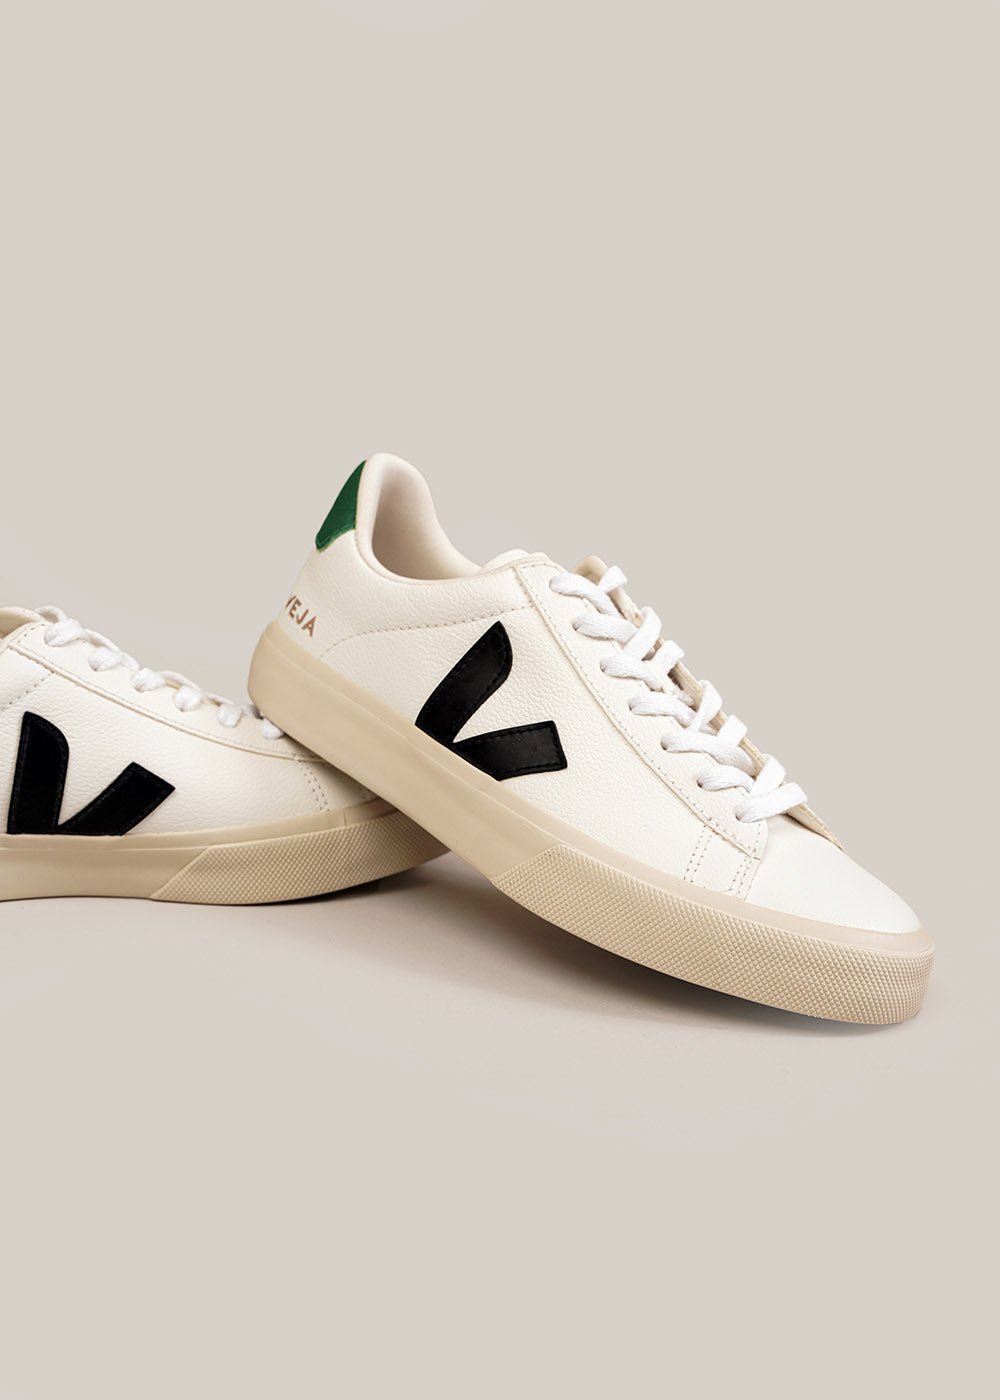 Veja Extra-White Black Emeraude Campo Sneakers - New Classics Studios Sustainable Ethical Fashion Canada